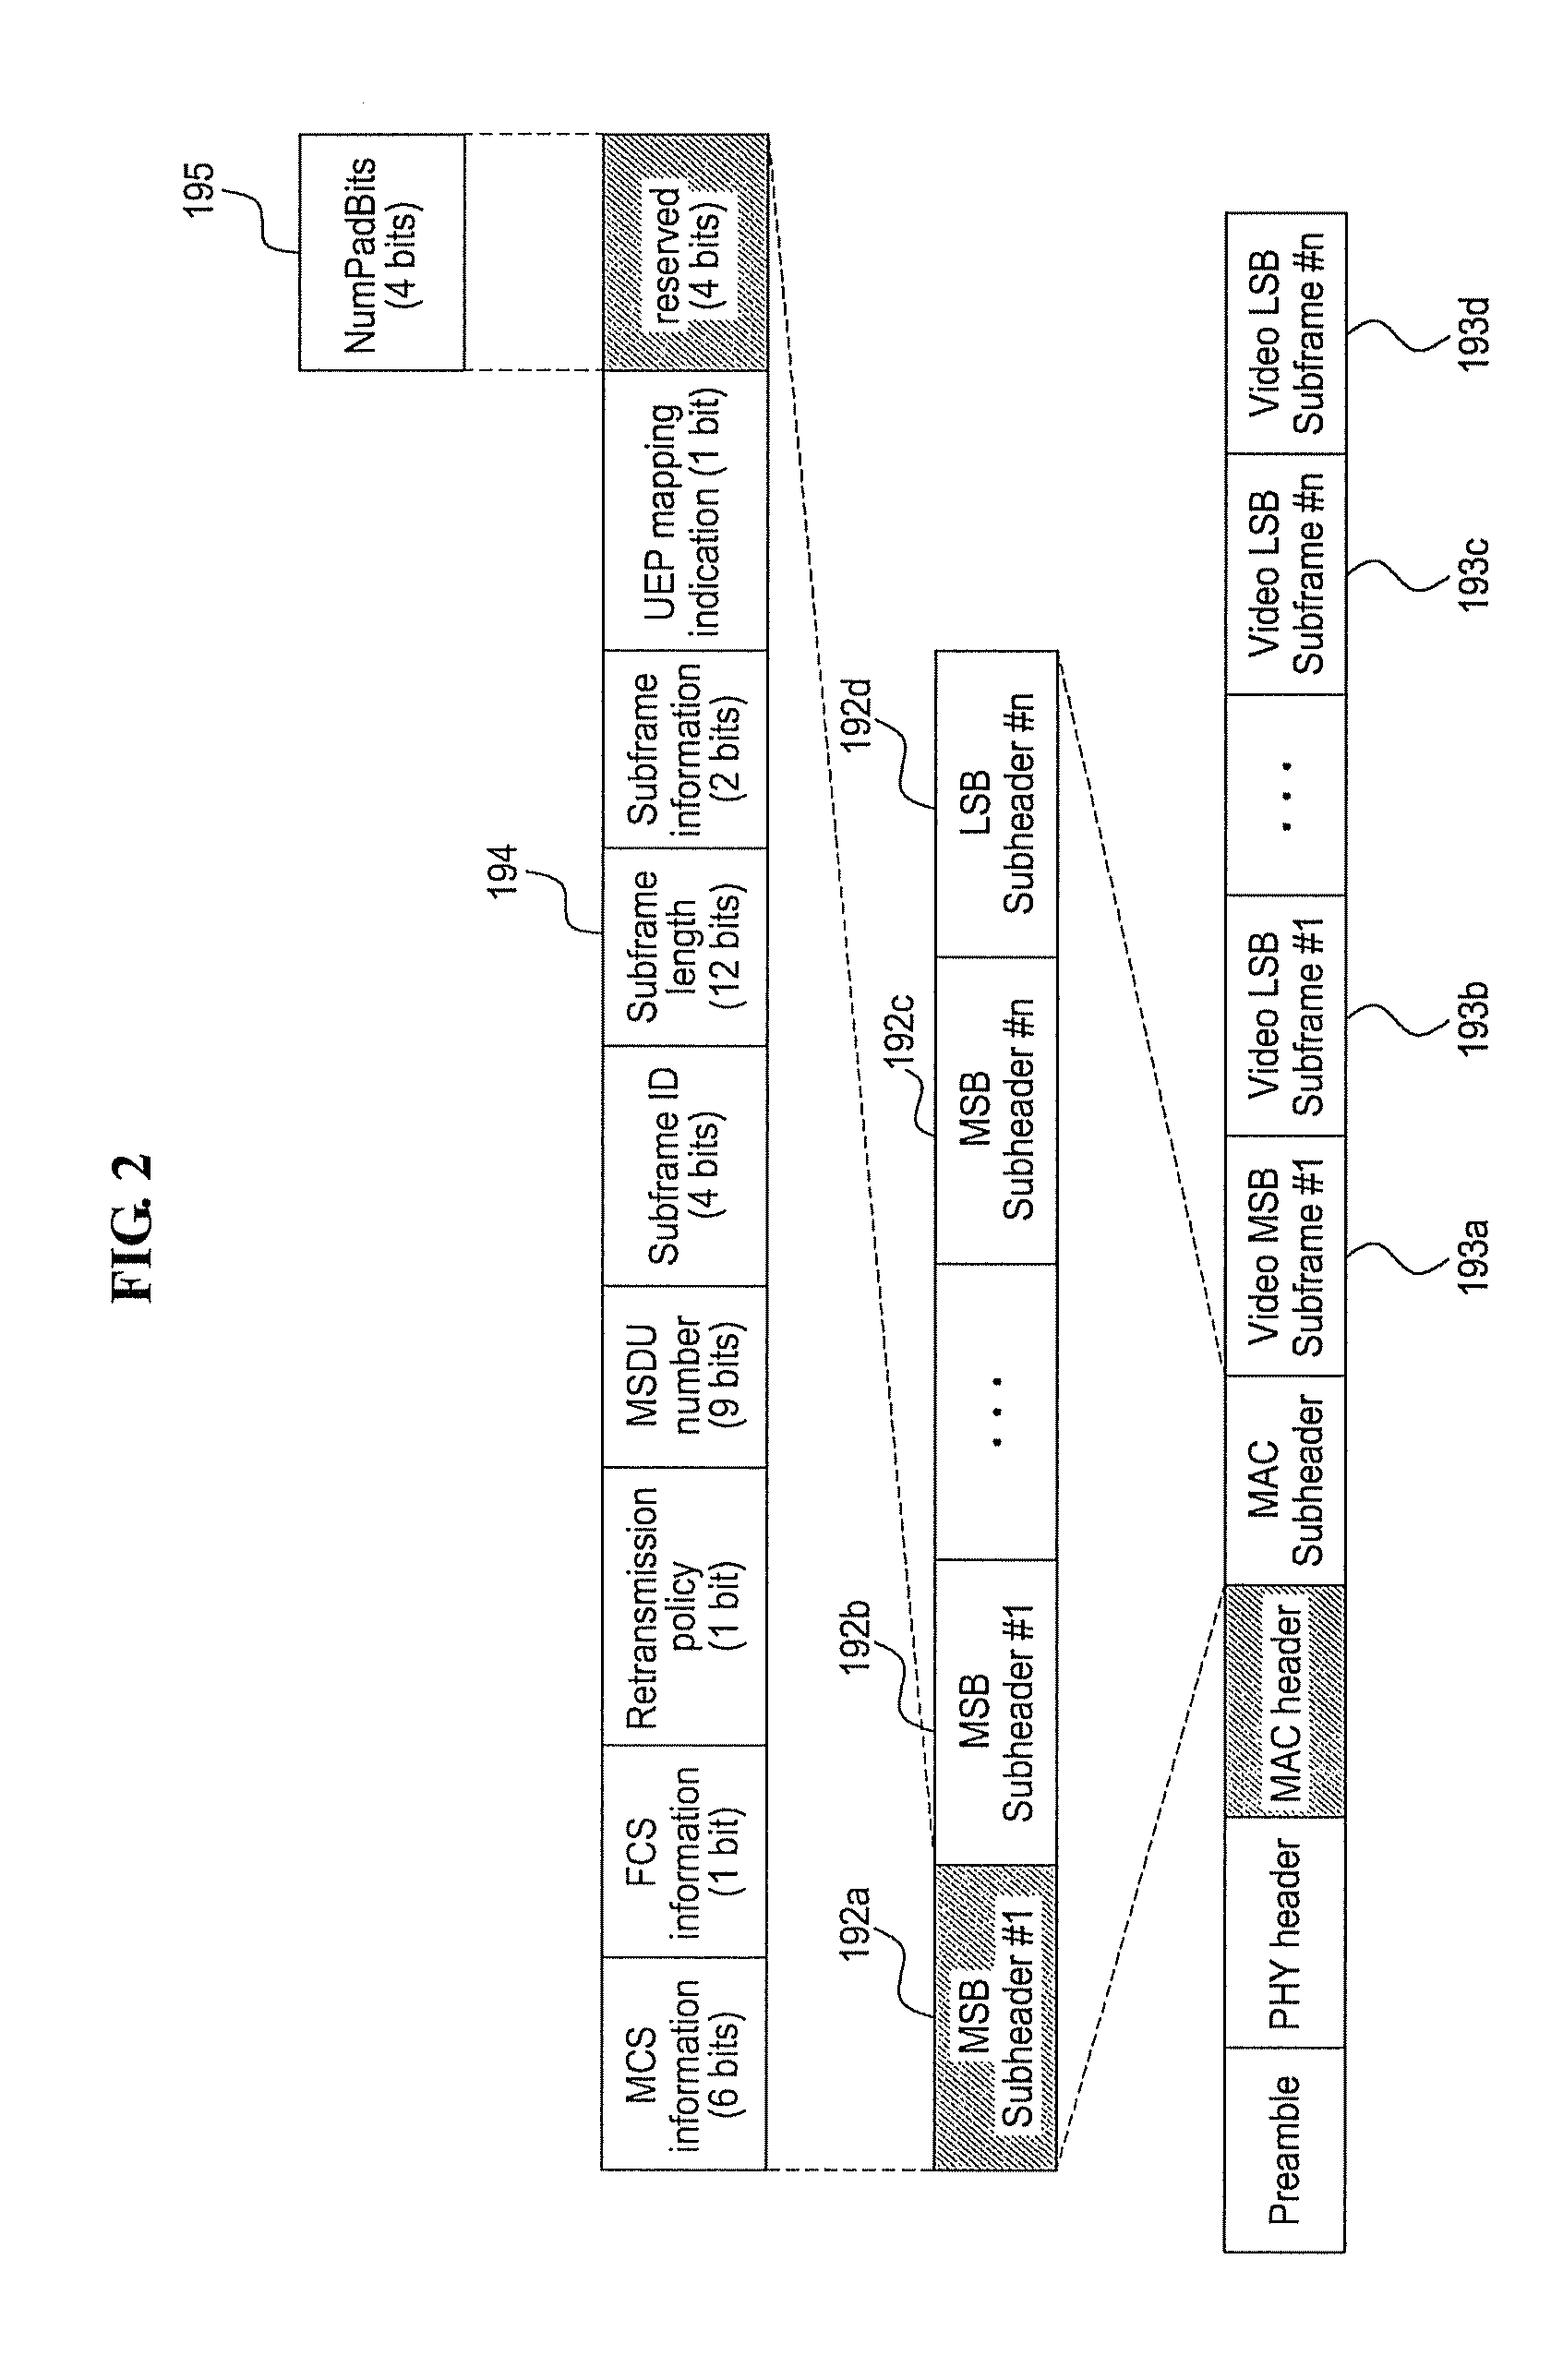 Method and apparatus for channel coding and modulation for unequal error protection in transmitting uncompressed video over wideband high frequency wireless system